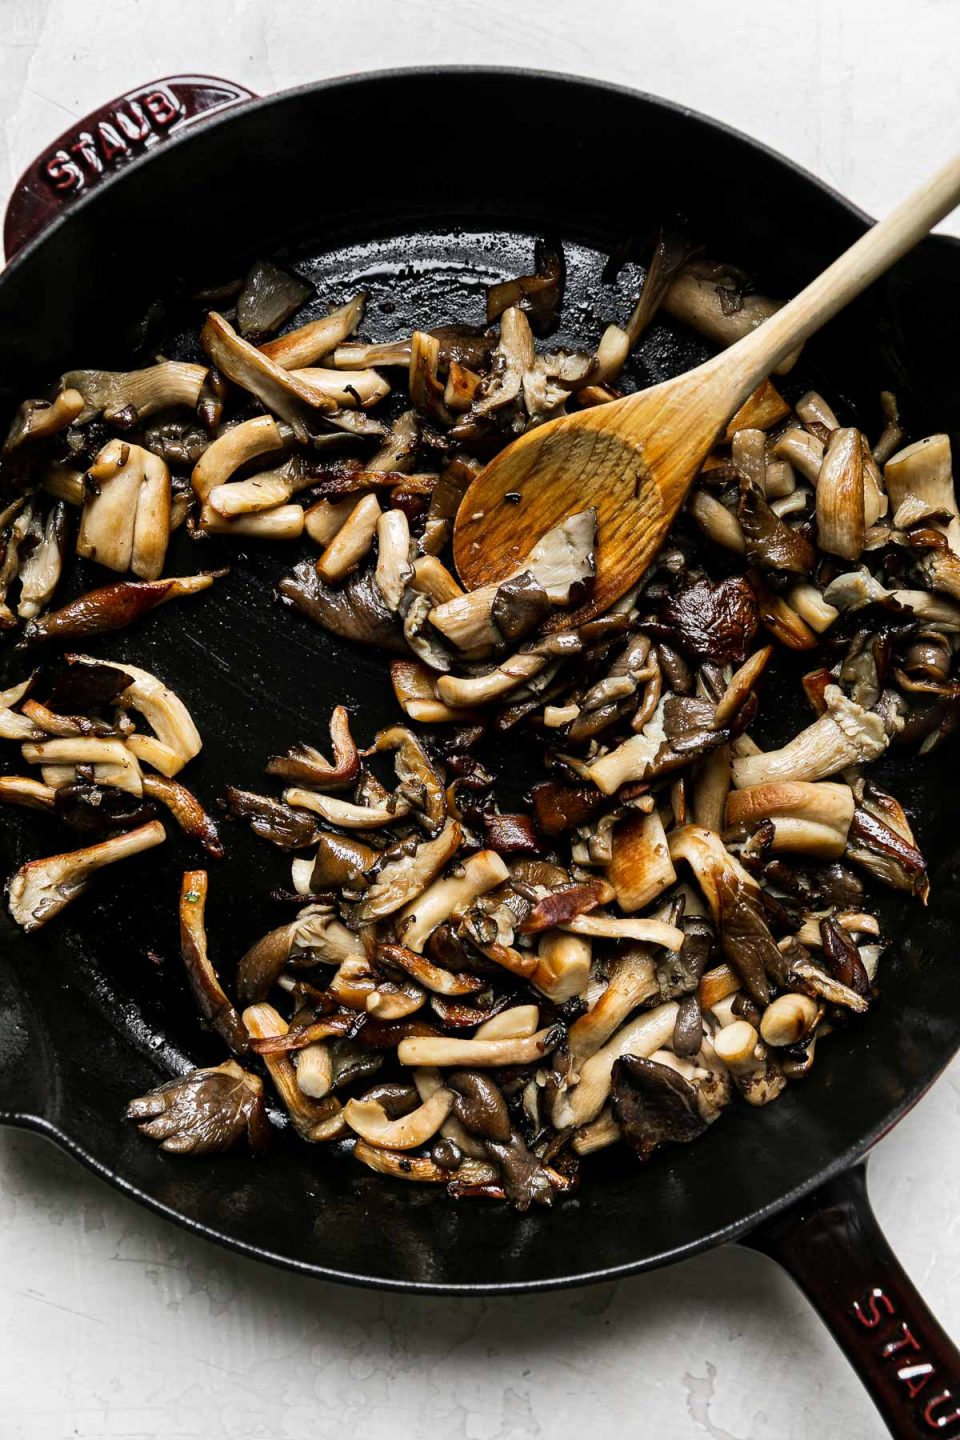 Sautéed & browned mushrooms in a Grenadine Staub Cast Iron Skillet. A wooden spoon rests in the skillet and the skillet sits atop a creamy white textured surface.